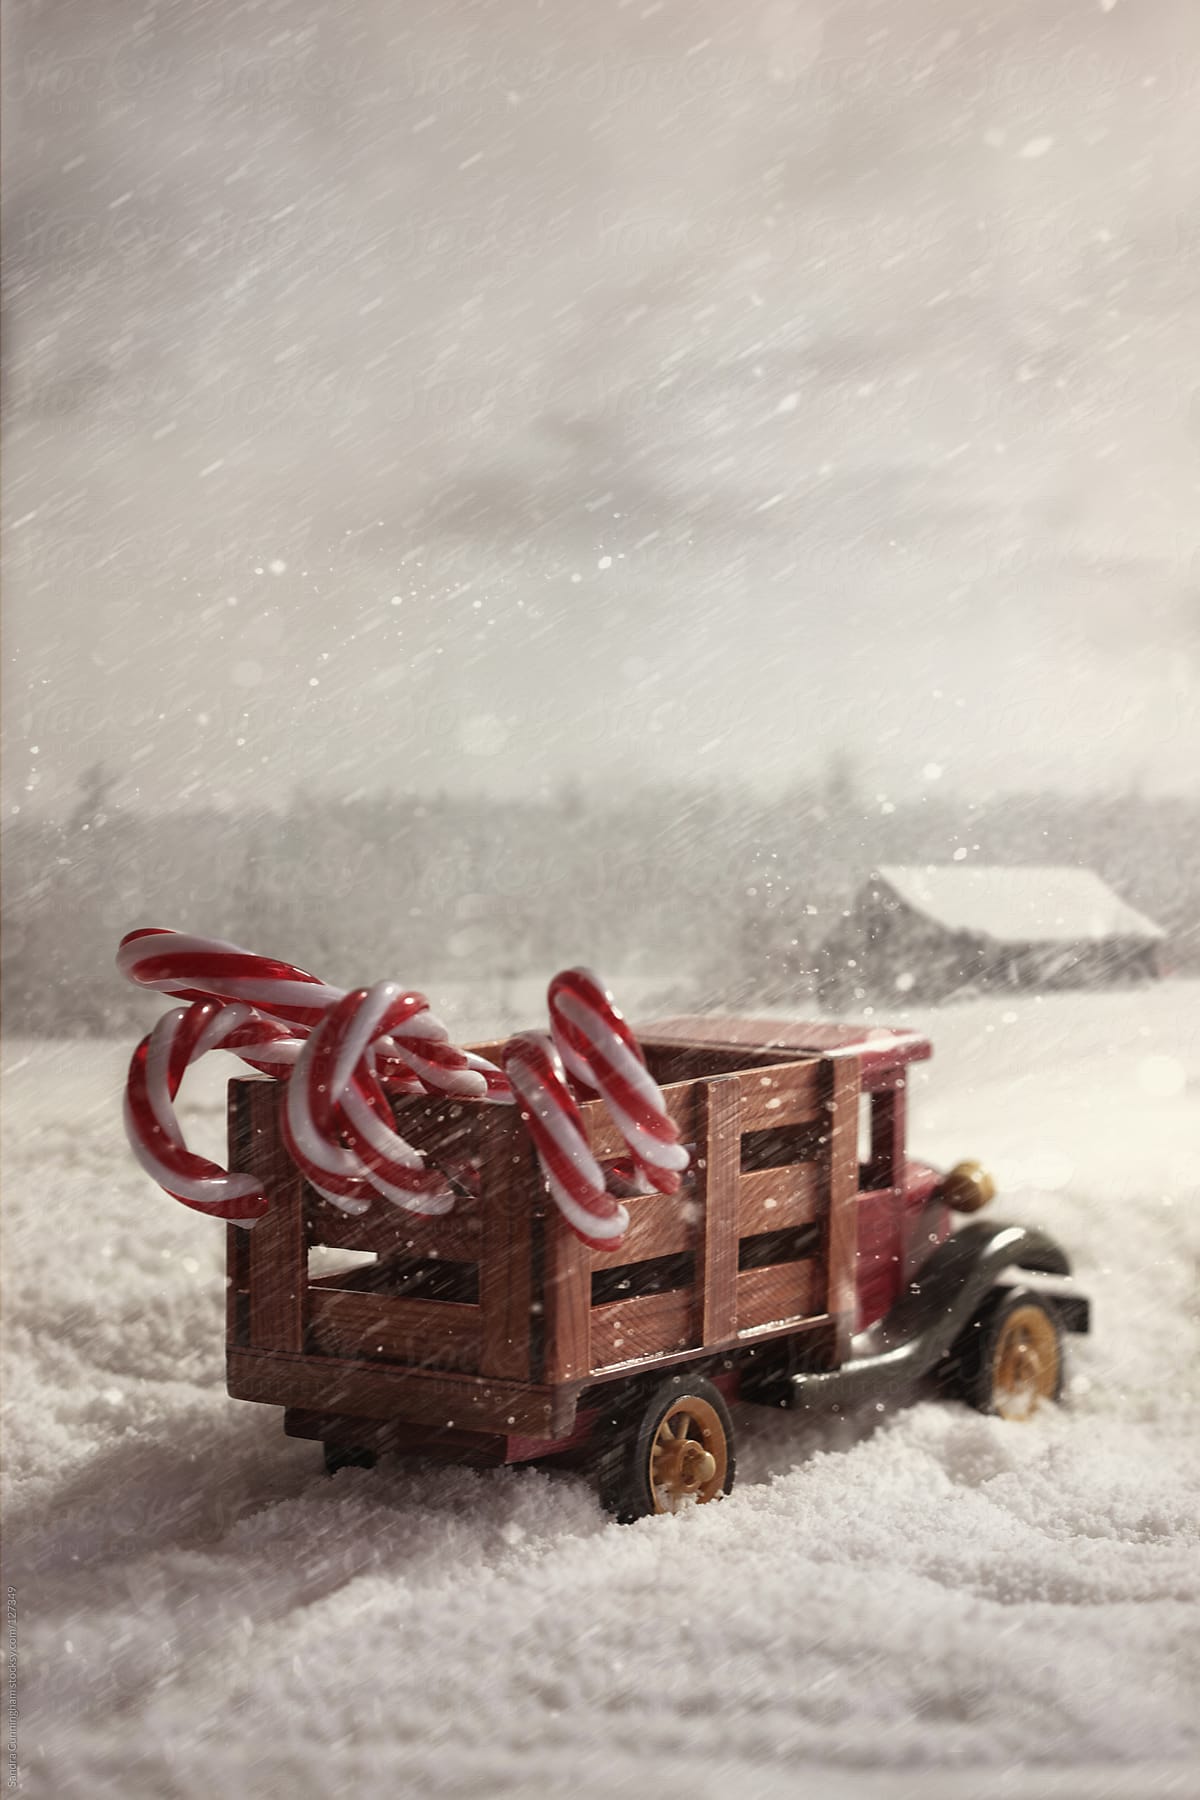 Small toy truck with candy canes in snow